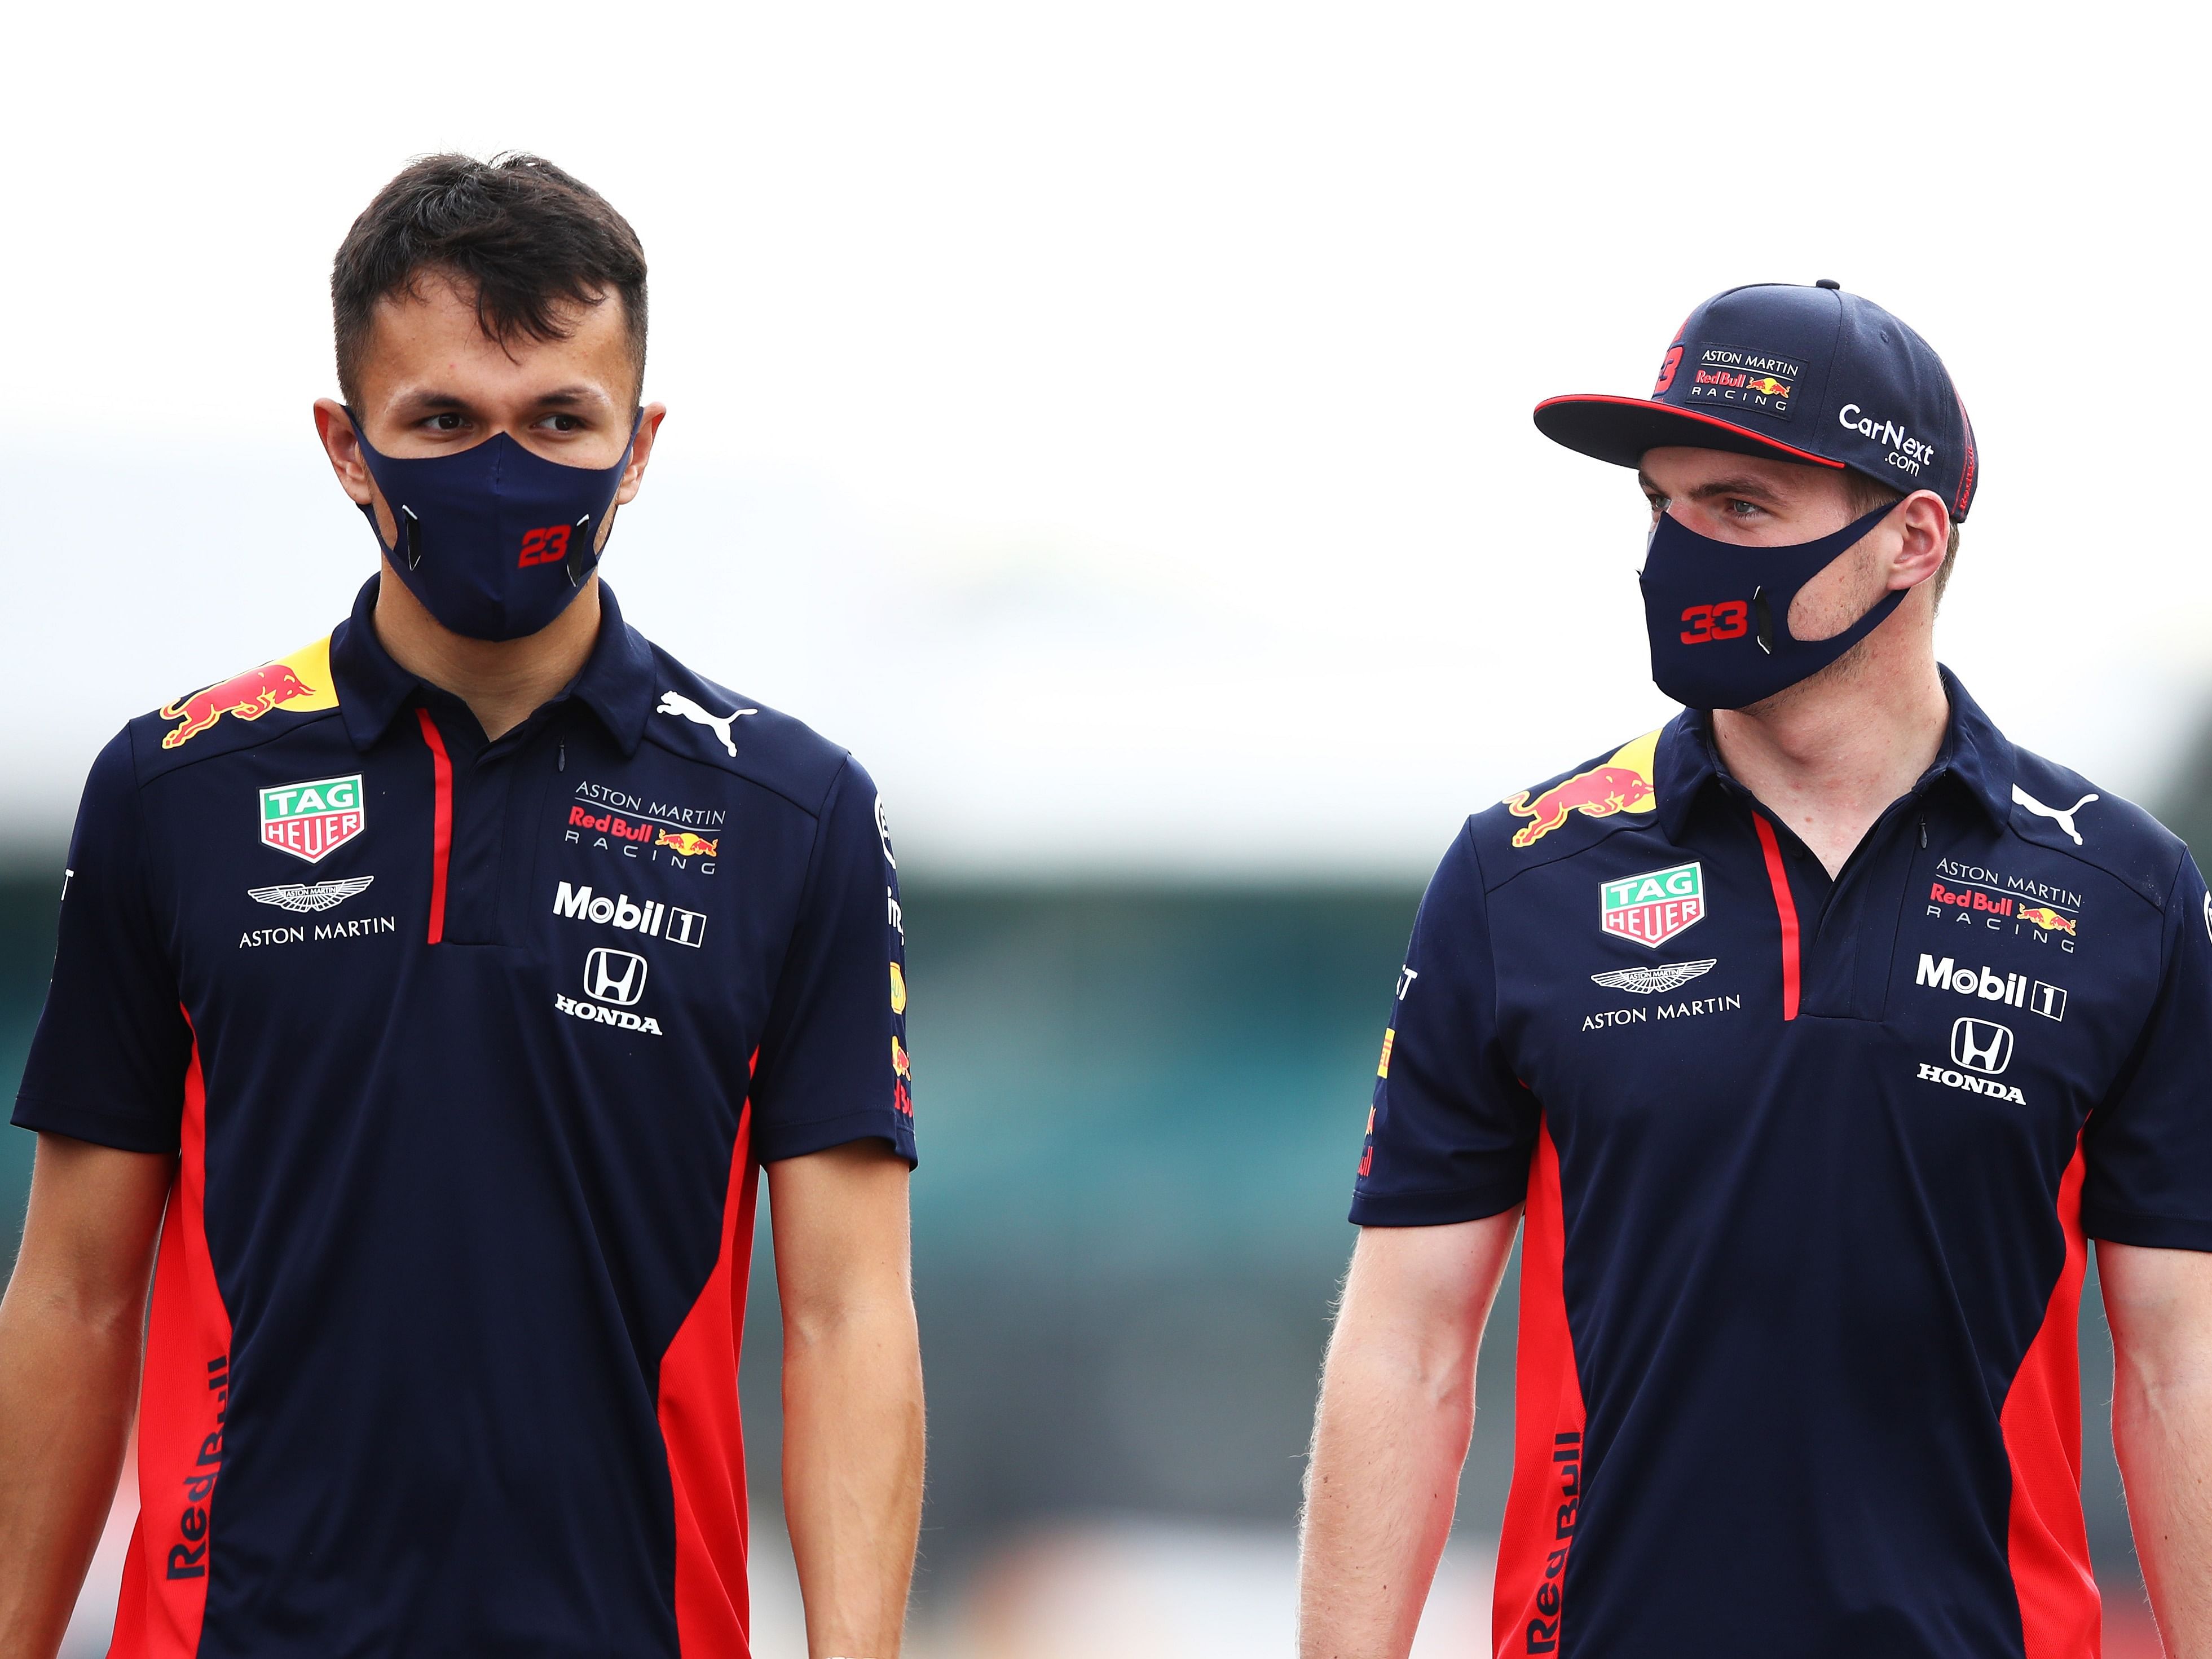 Max Verstappen and Alexander Albon walk the track during previews ahead of the 2020 F1 70th Anniversary British Grand Prix. (Photo by Mark Thompson/Getty Images)